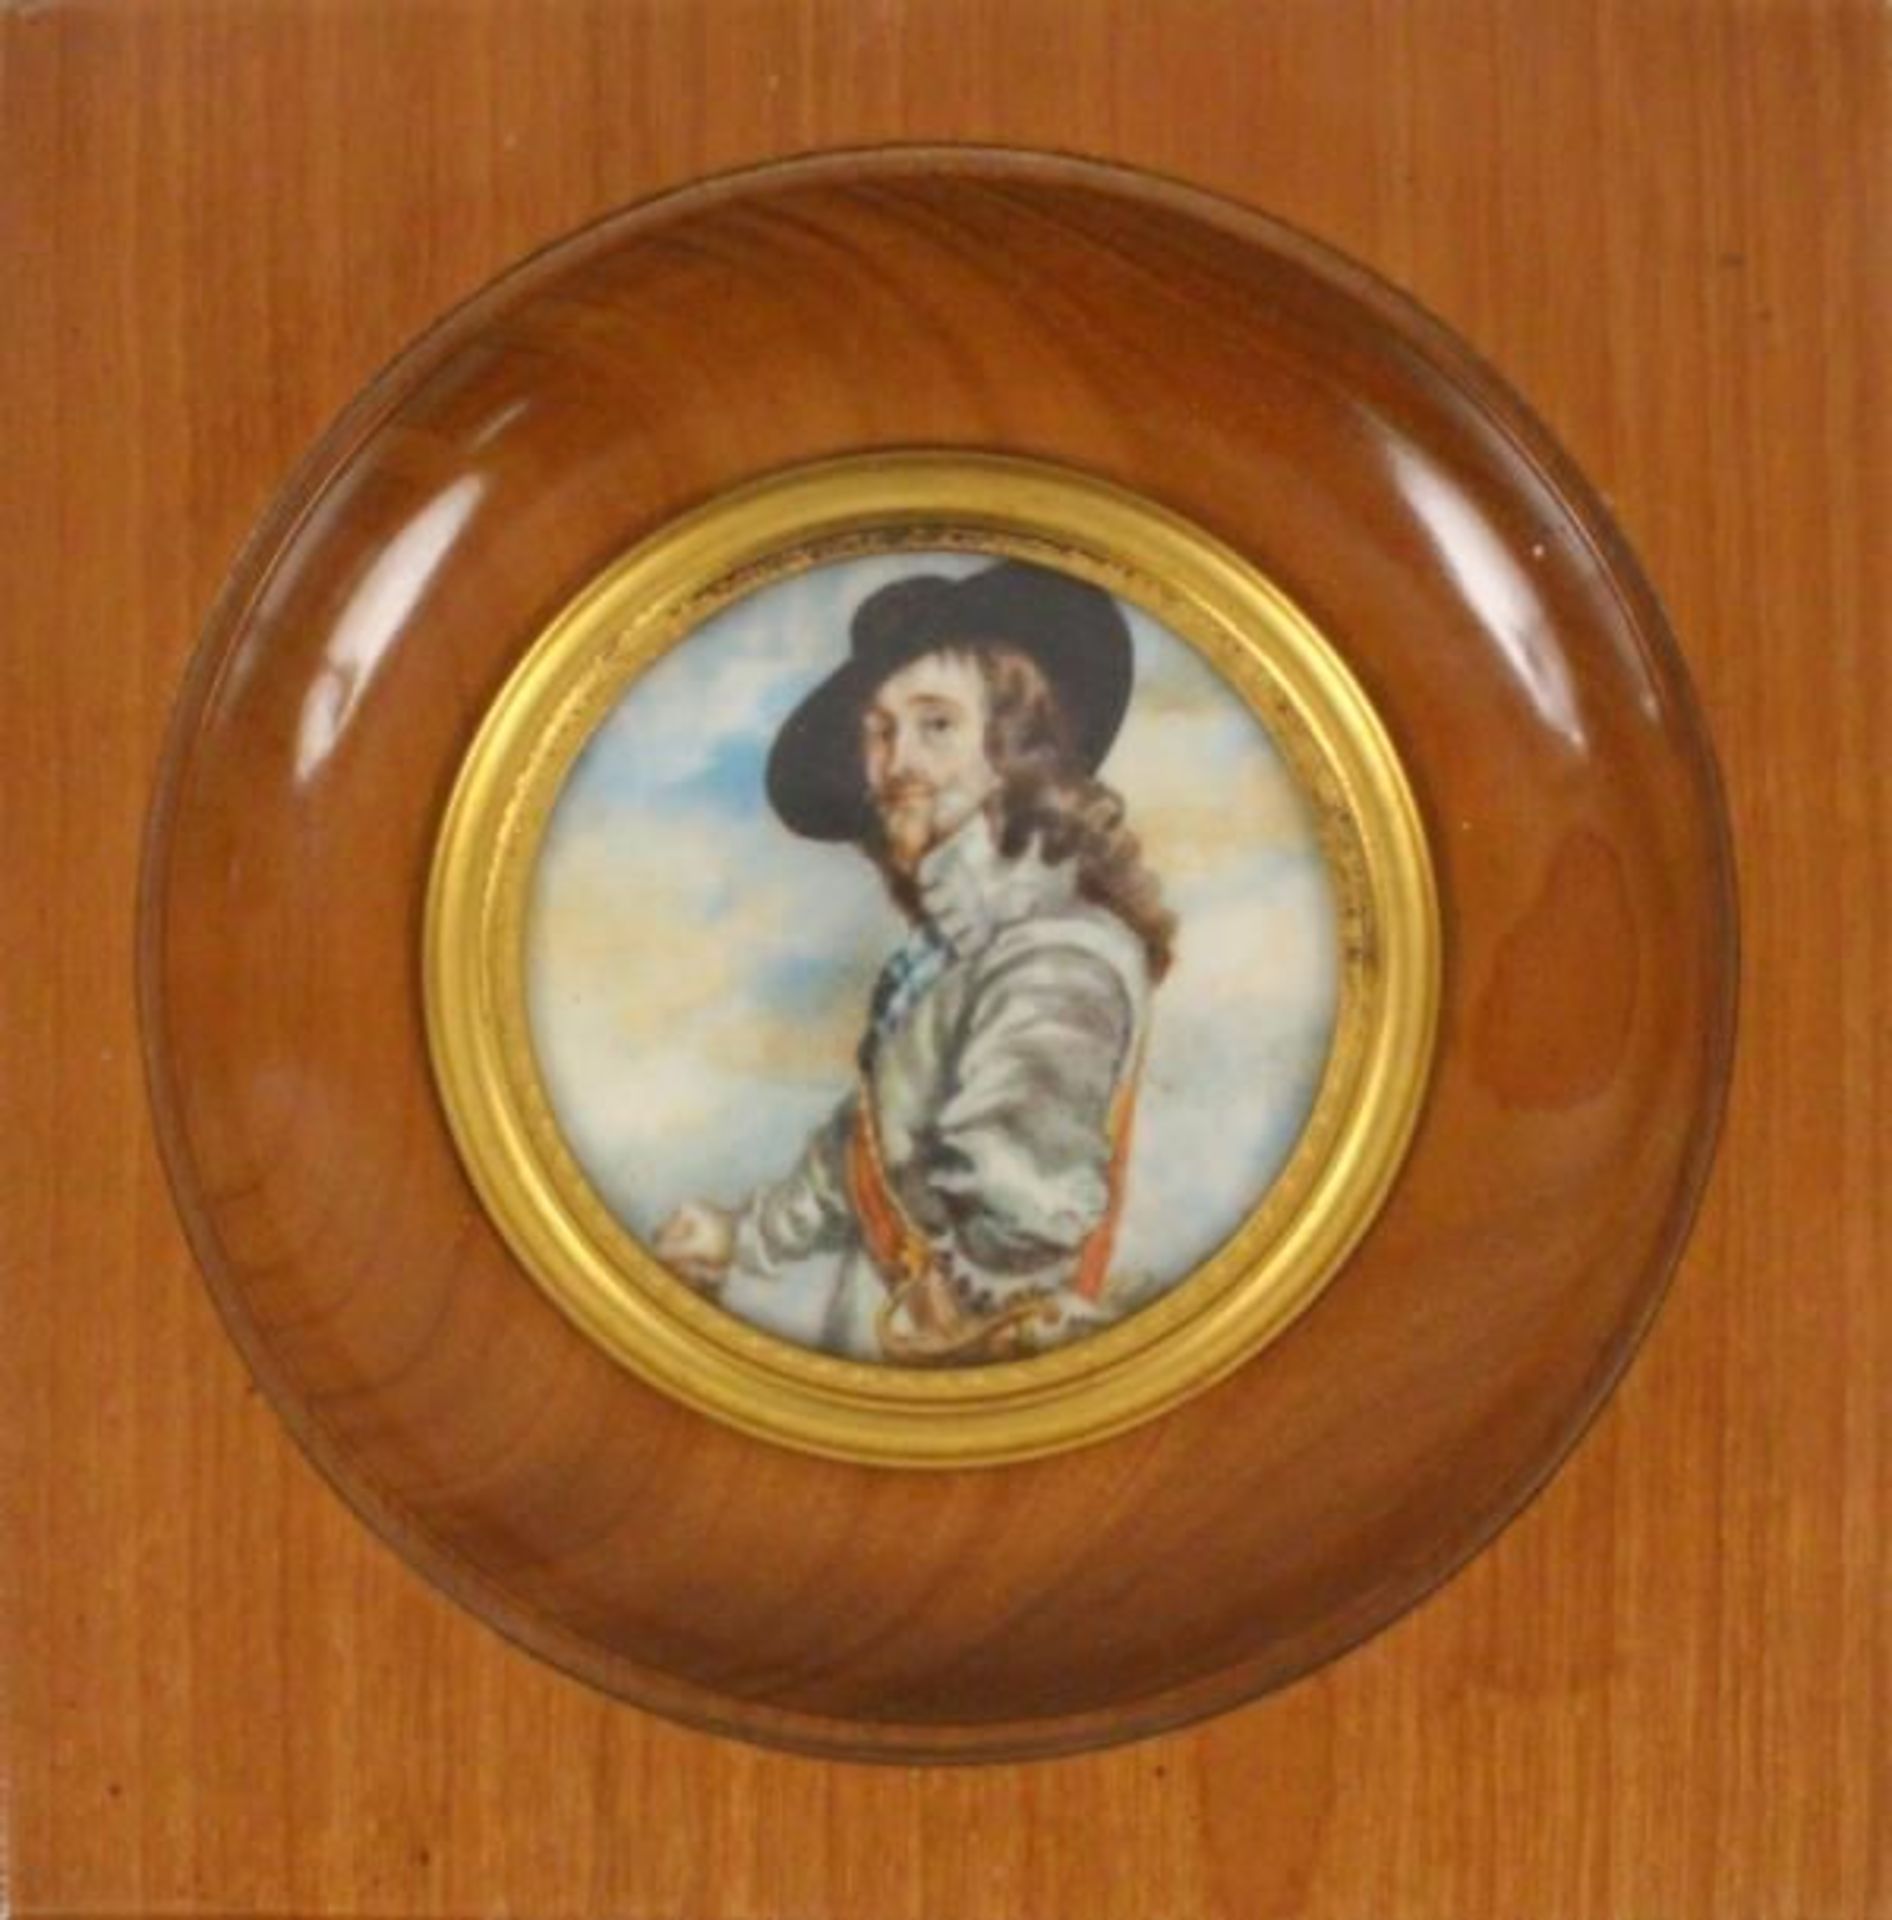 A MINIATURE A portrait of a noble French man of the 17th century, colourful painted on ivory,